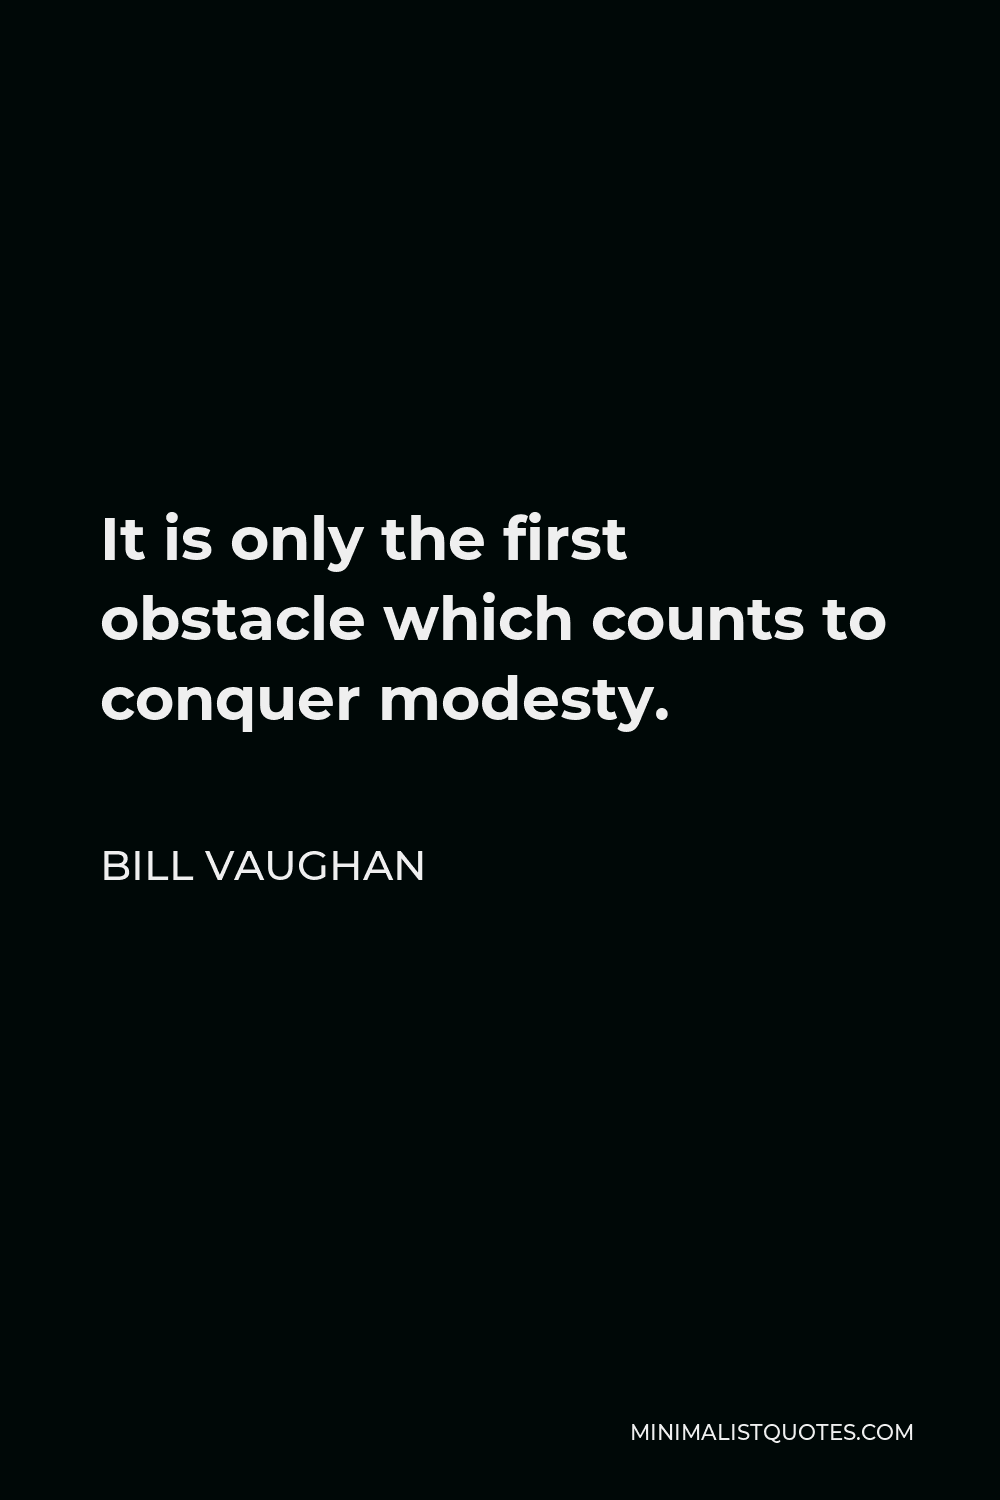 Bill Vaughan Quote - It is only the first obstacle which counts to conquer modesty.